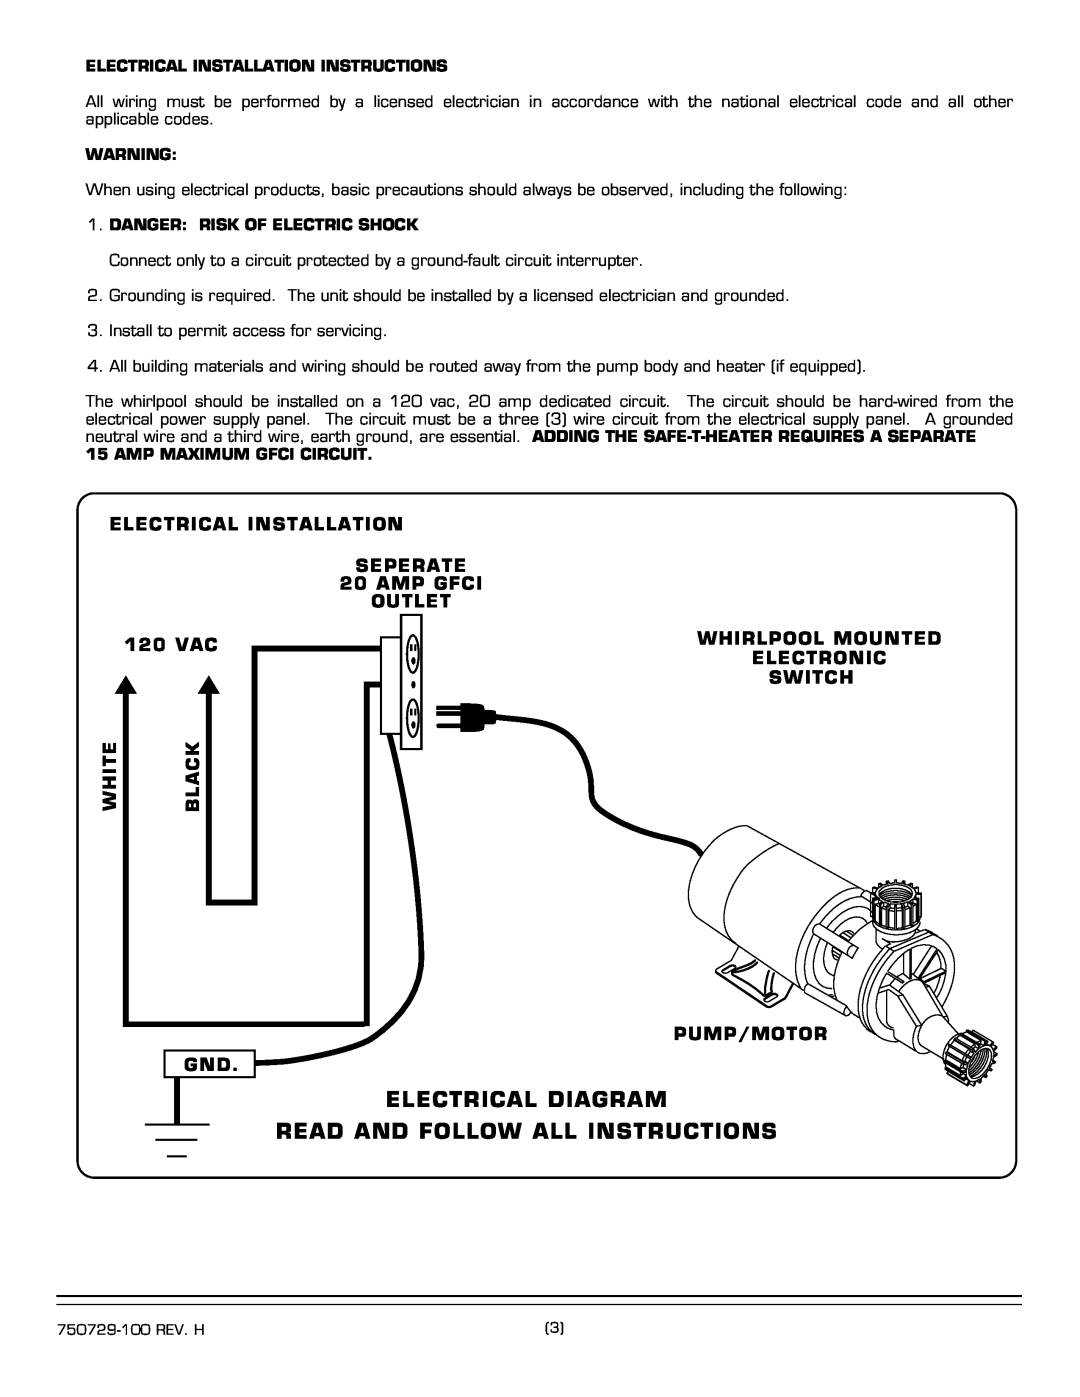 American Standard 7236.XXXW Electrical Diagram Read And Follow All Instructions, 120 VAC, White, Black 